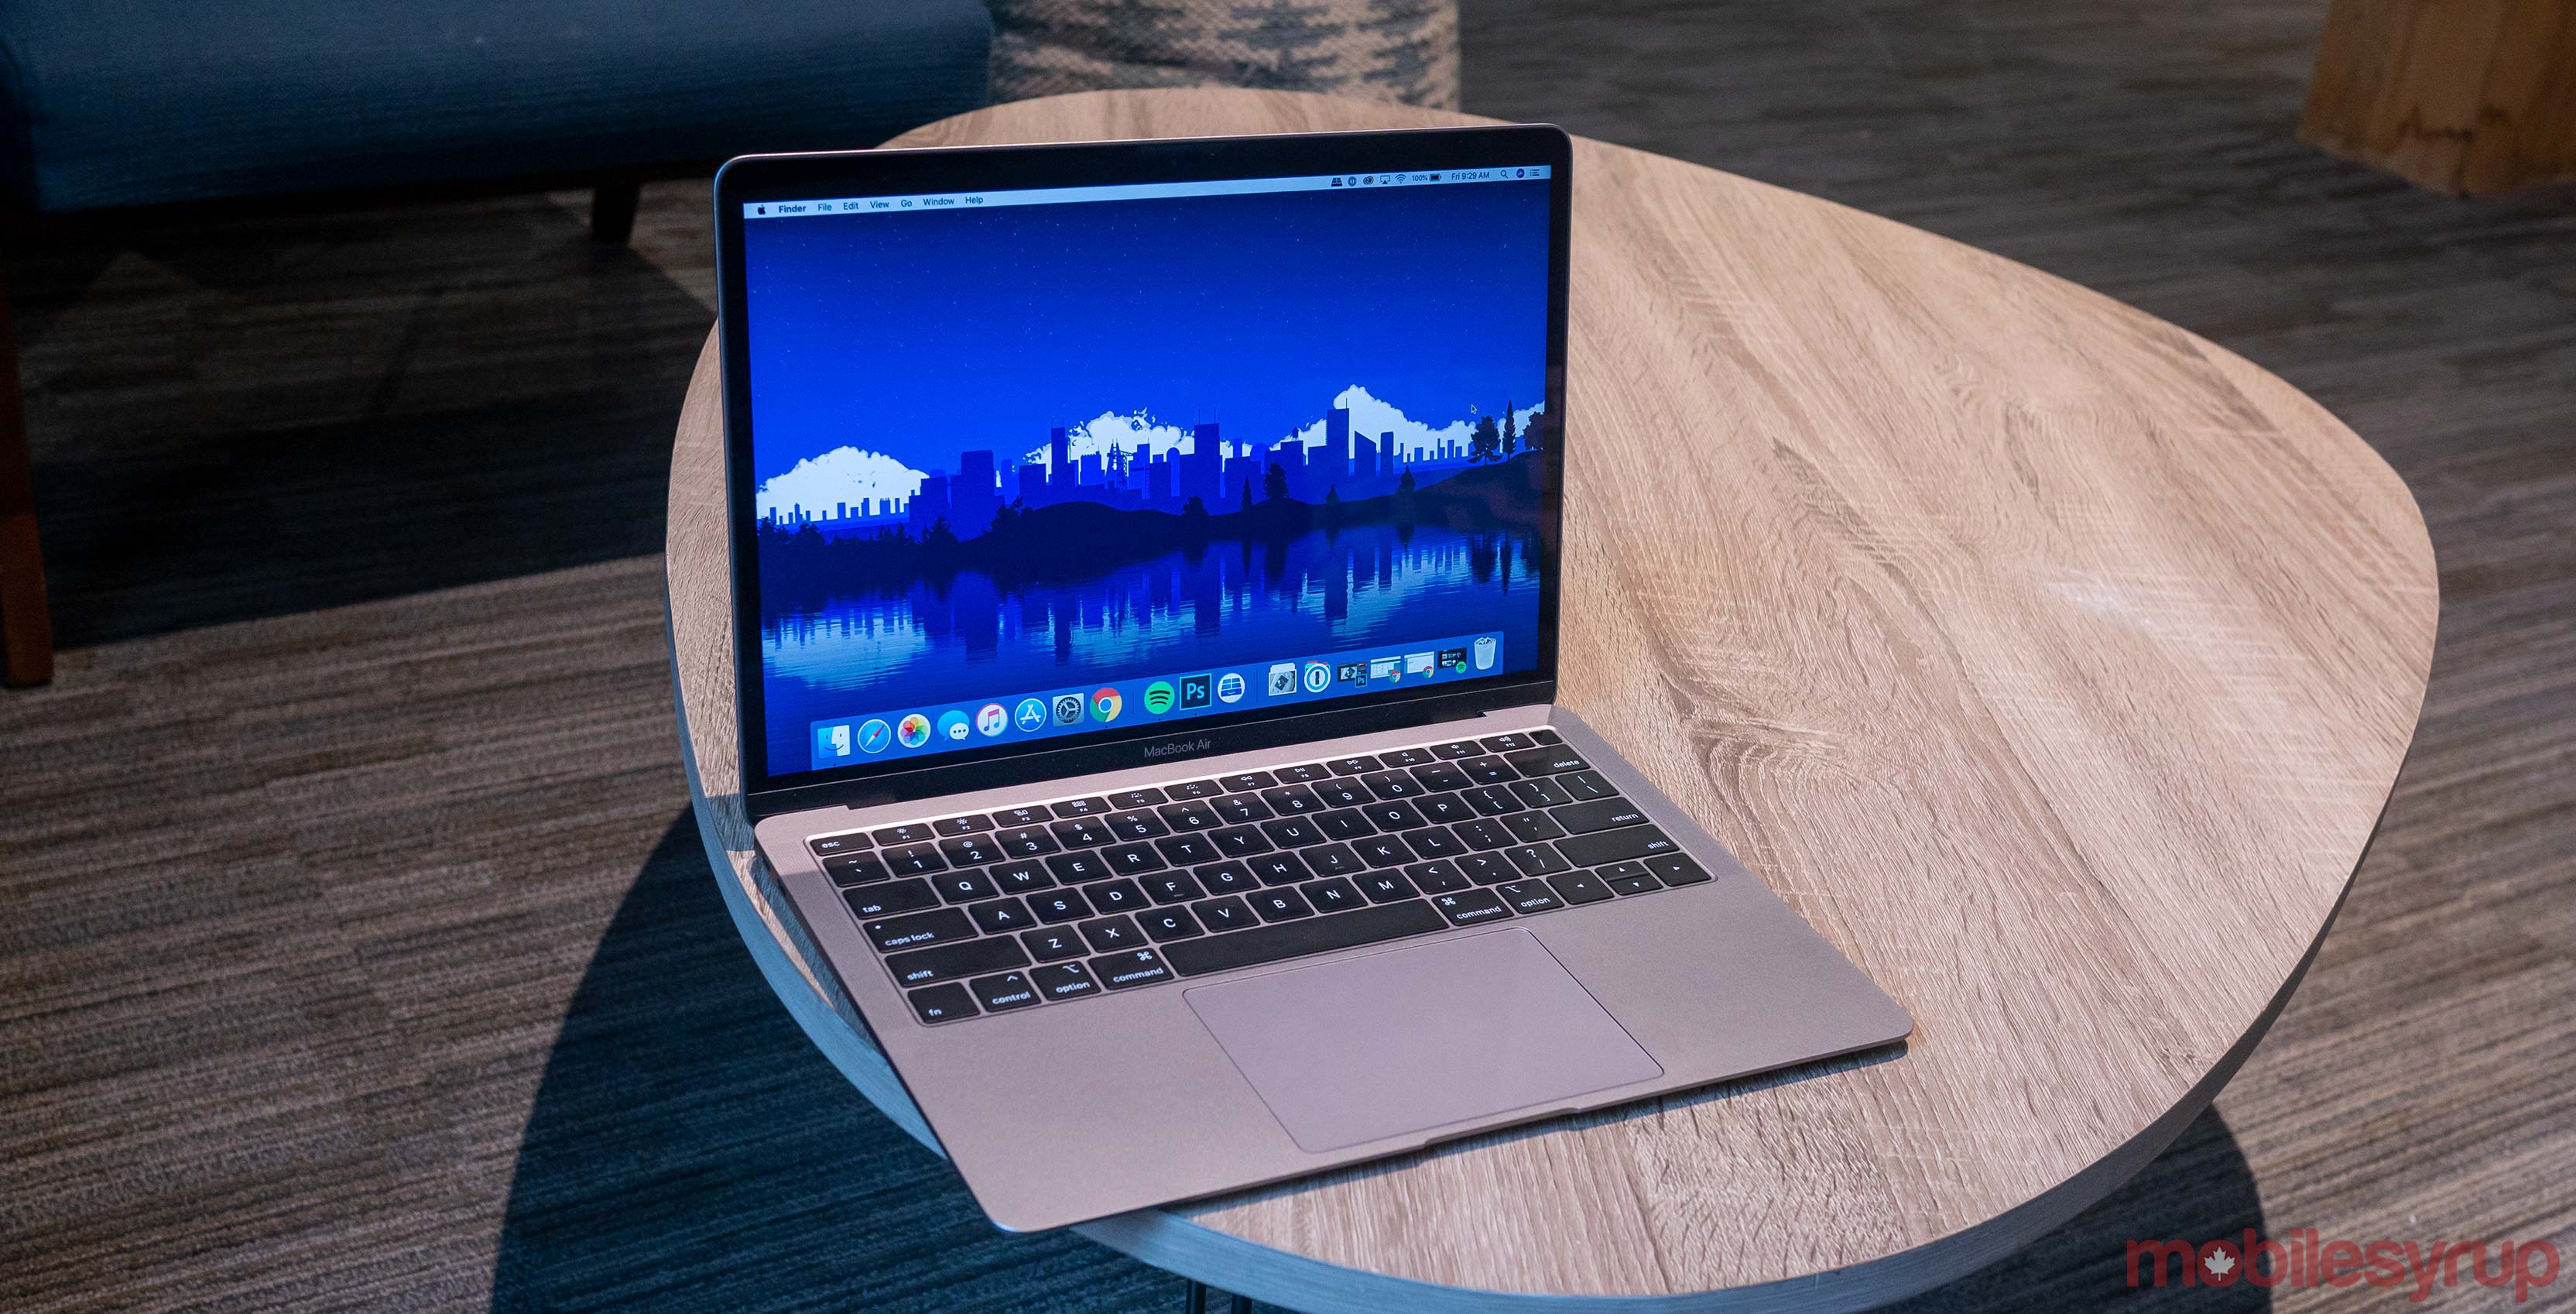 Apple S 2018 Macbook Air Features The Latest Macbook Pro S Silicon Membrane Keyboard